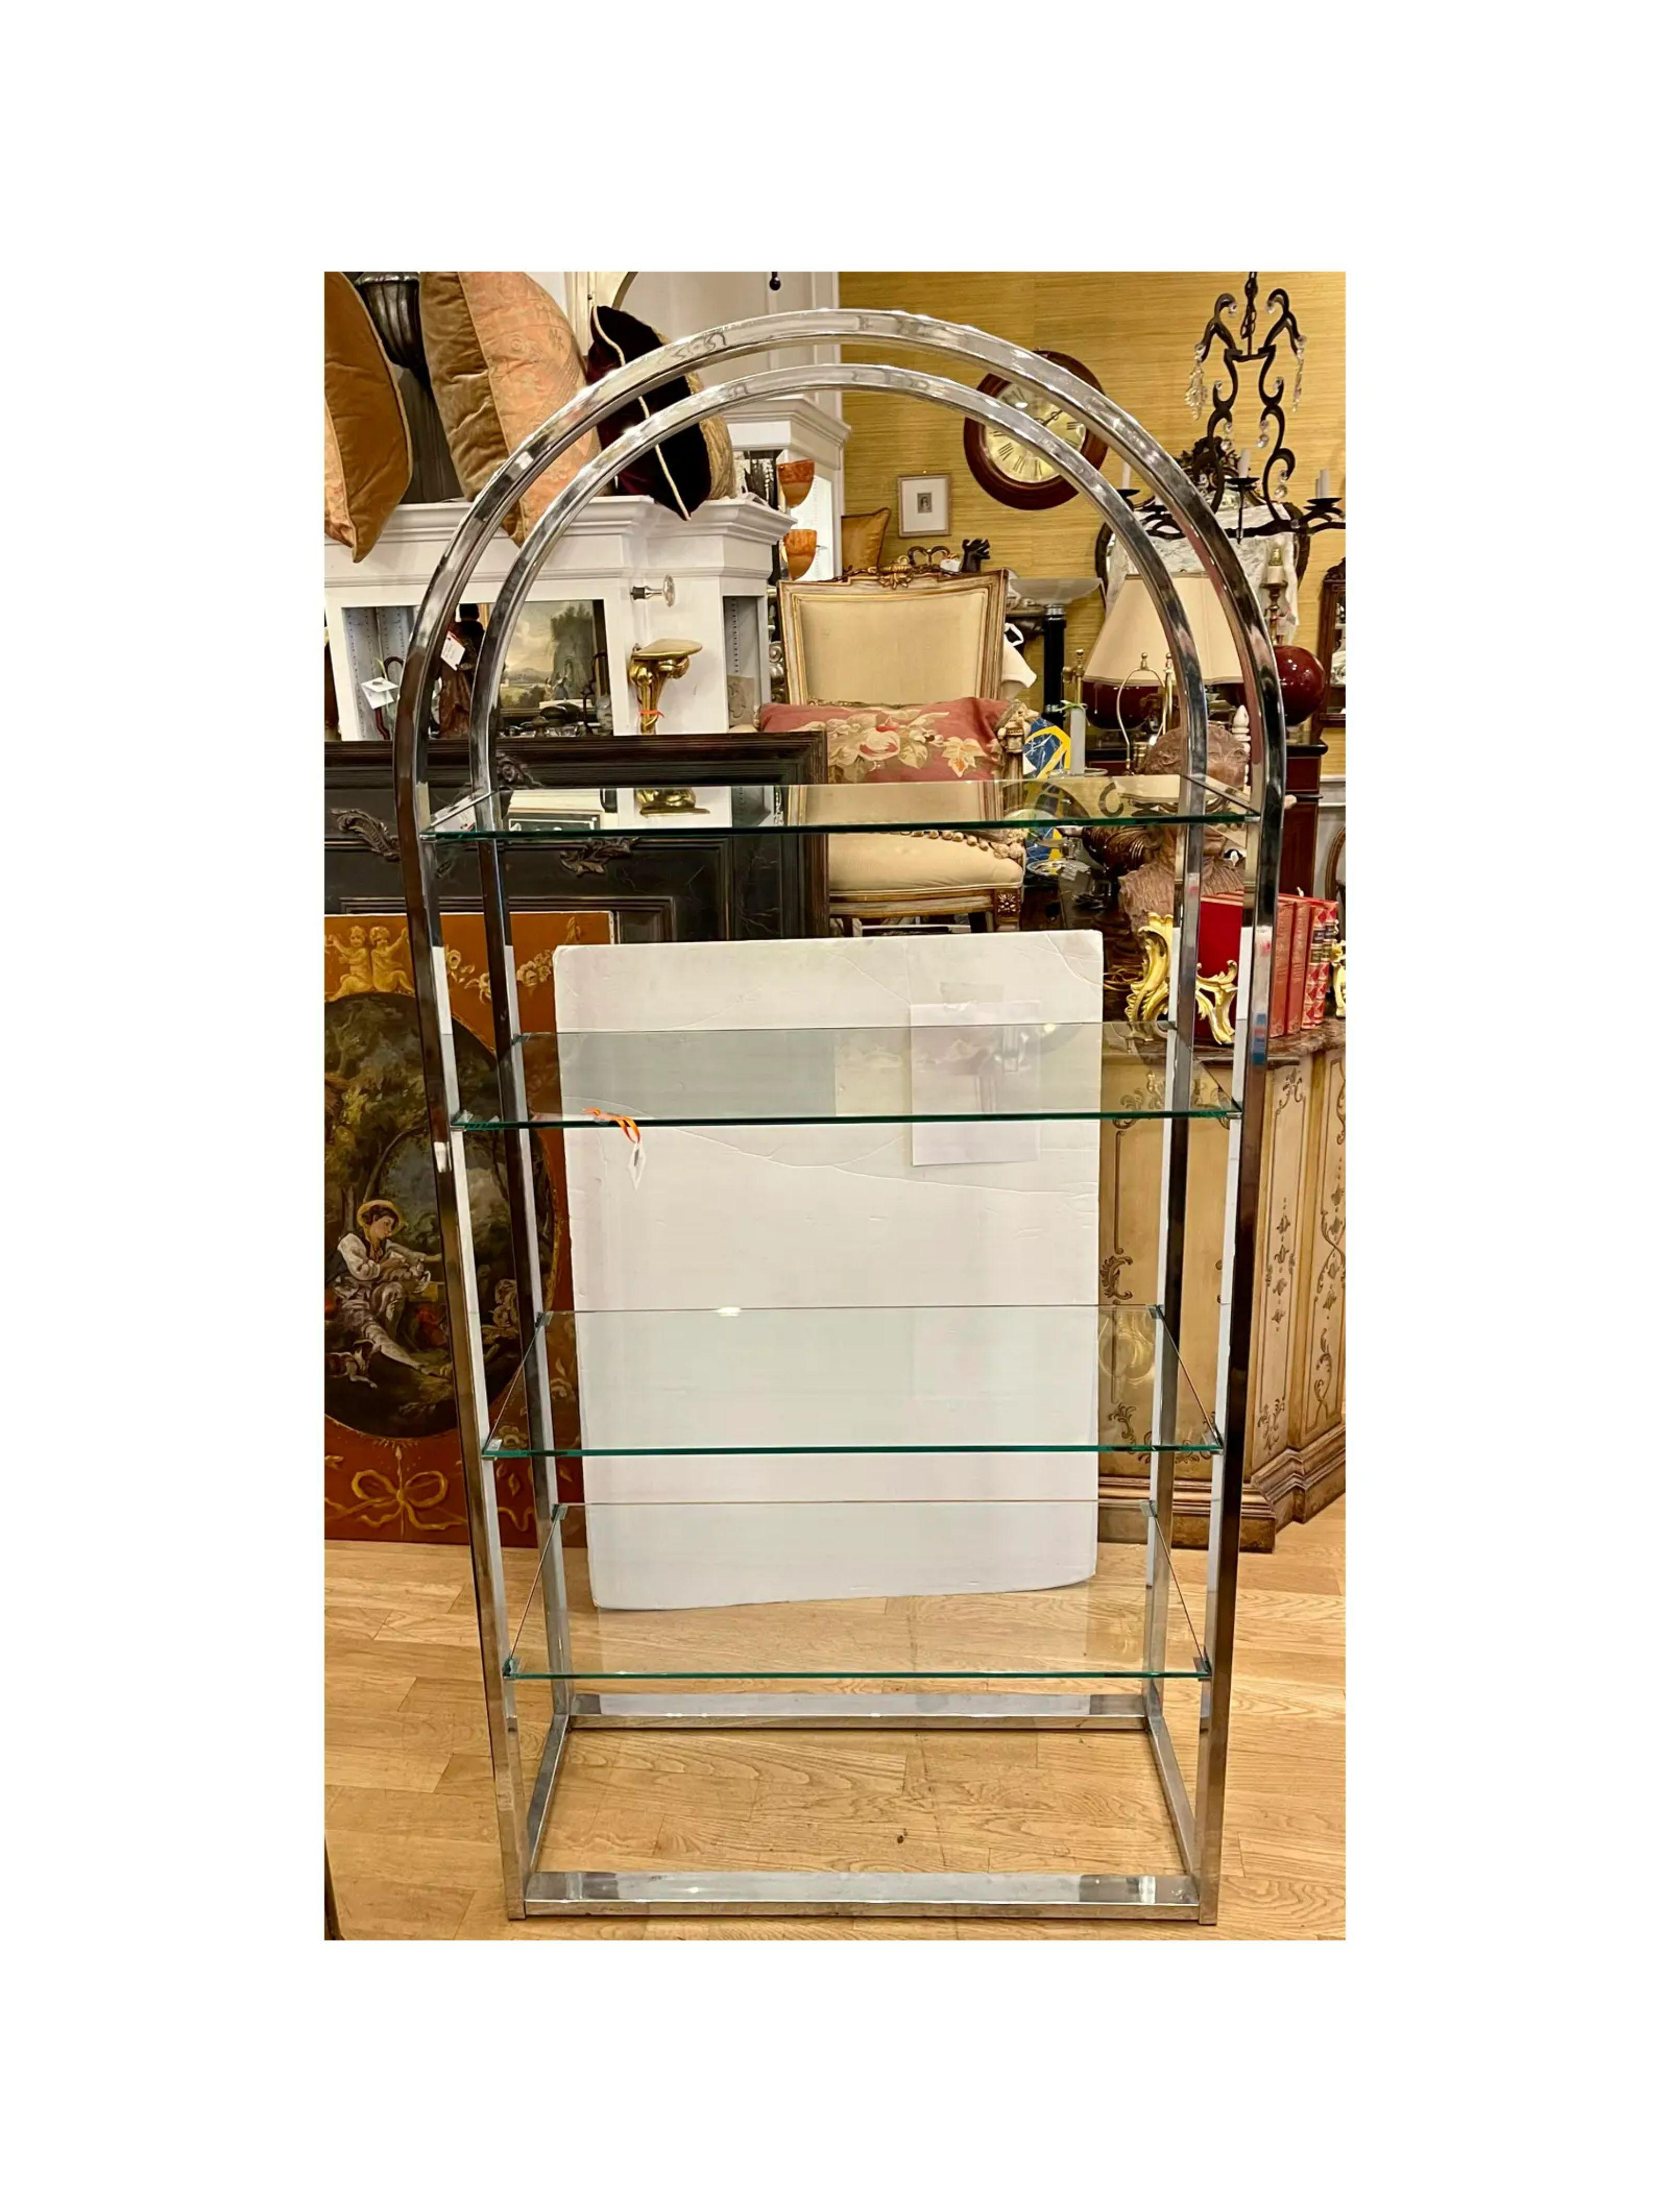 Modern Chrome & Glass Arched Etagere Display Shelving Unit, Mid-20th Century For Sale 1